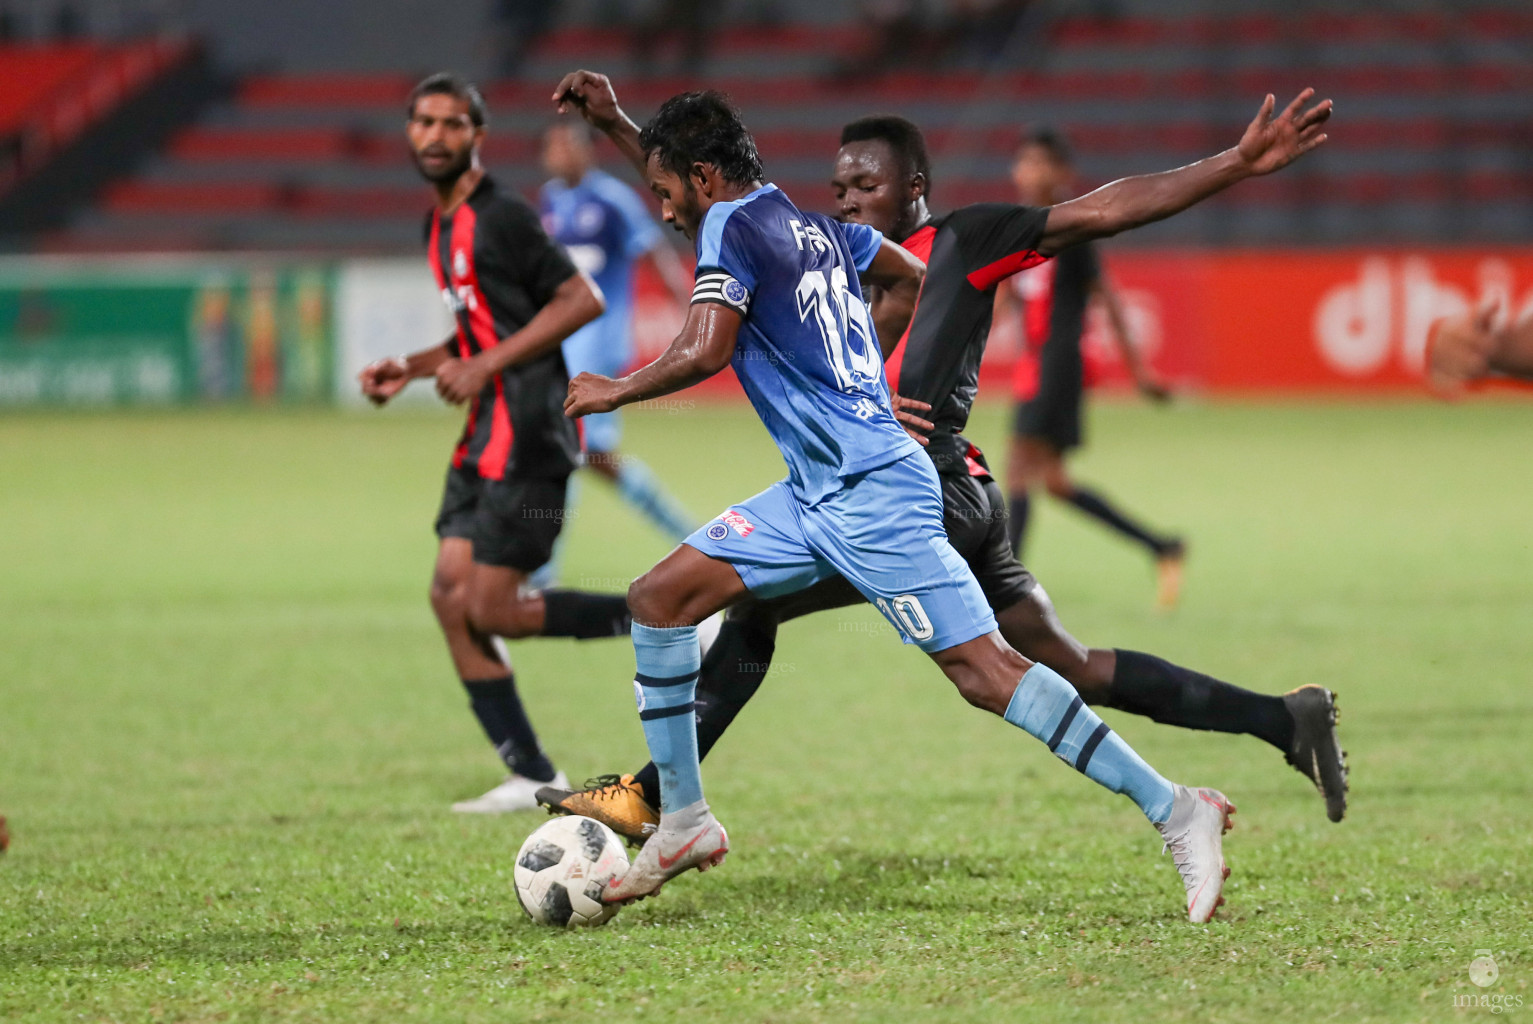 New Radiant SC vs Nilandhoo in Dhiraagu Dhivehi Premier League 2018 in Male, Maldives, Friday, October 12, 2018. (Images.mv Photo/Suadh Abdul Sattar)